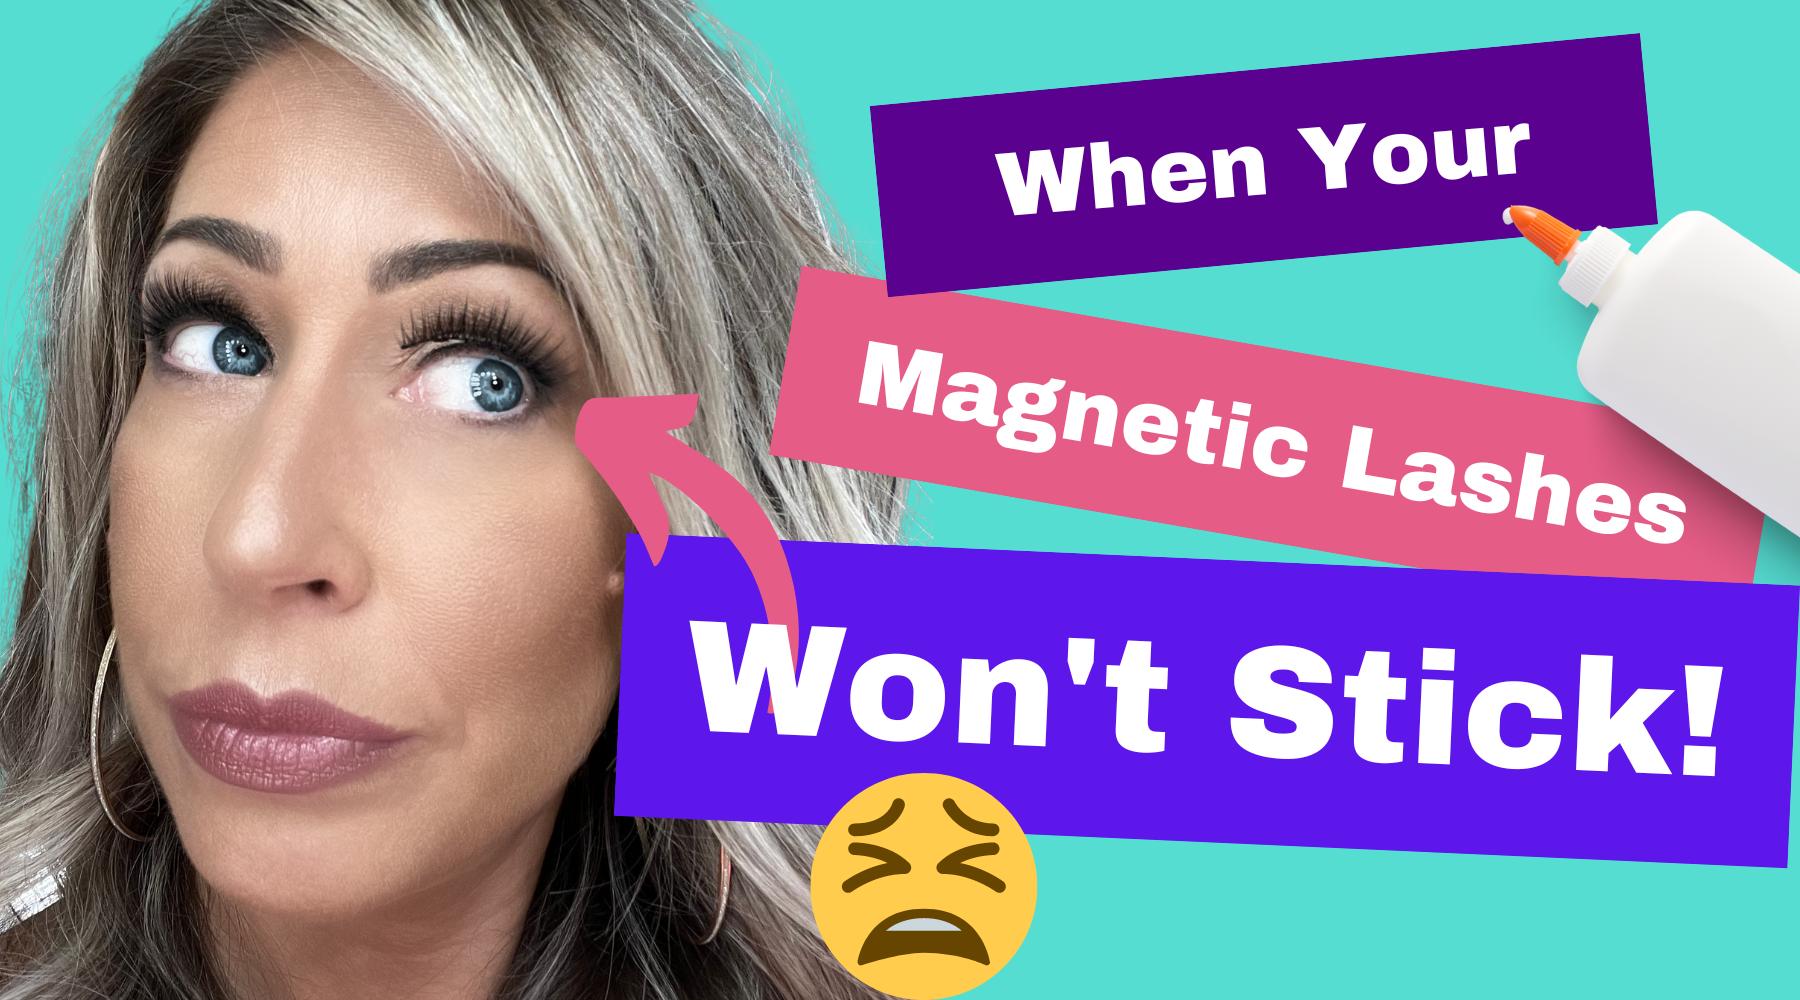 Expert Tips For Getting Your Magnetic Lashes To Stay In Place